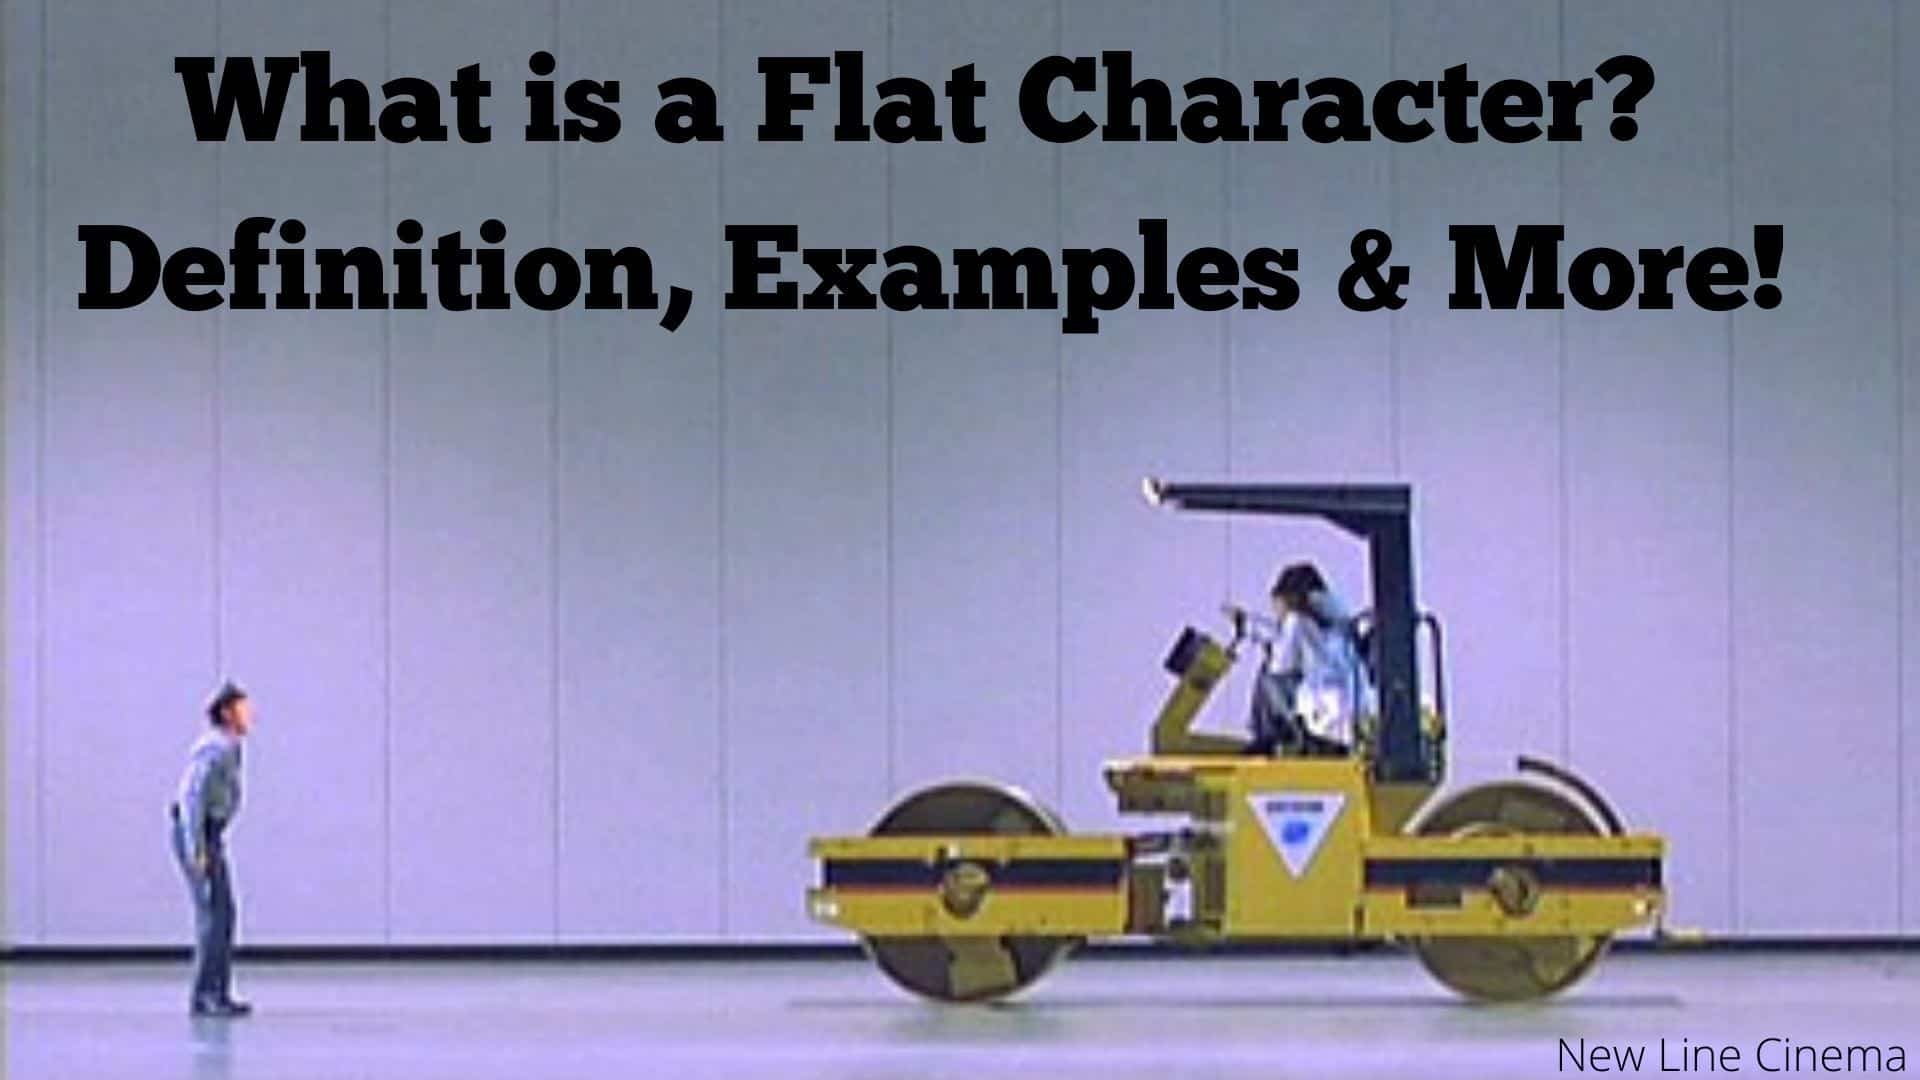 FLAT definition and meaning